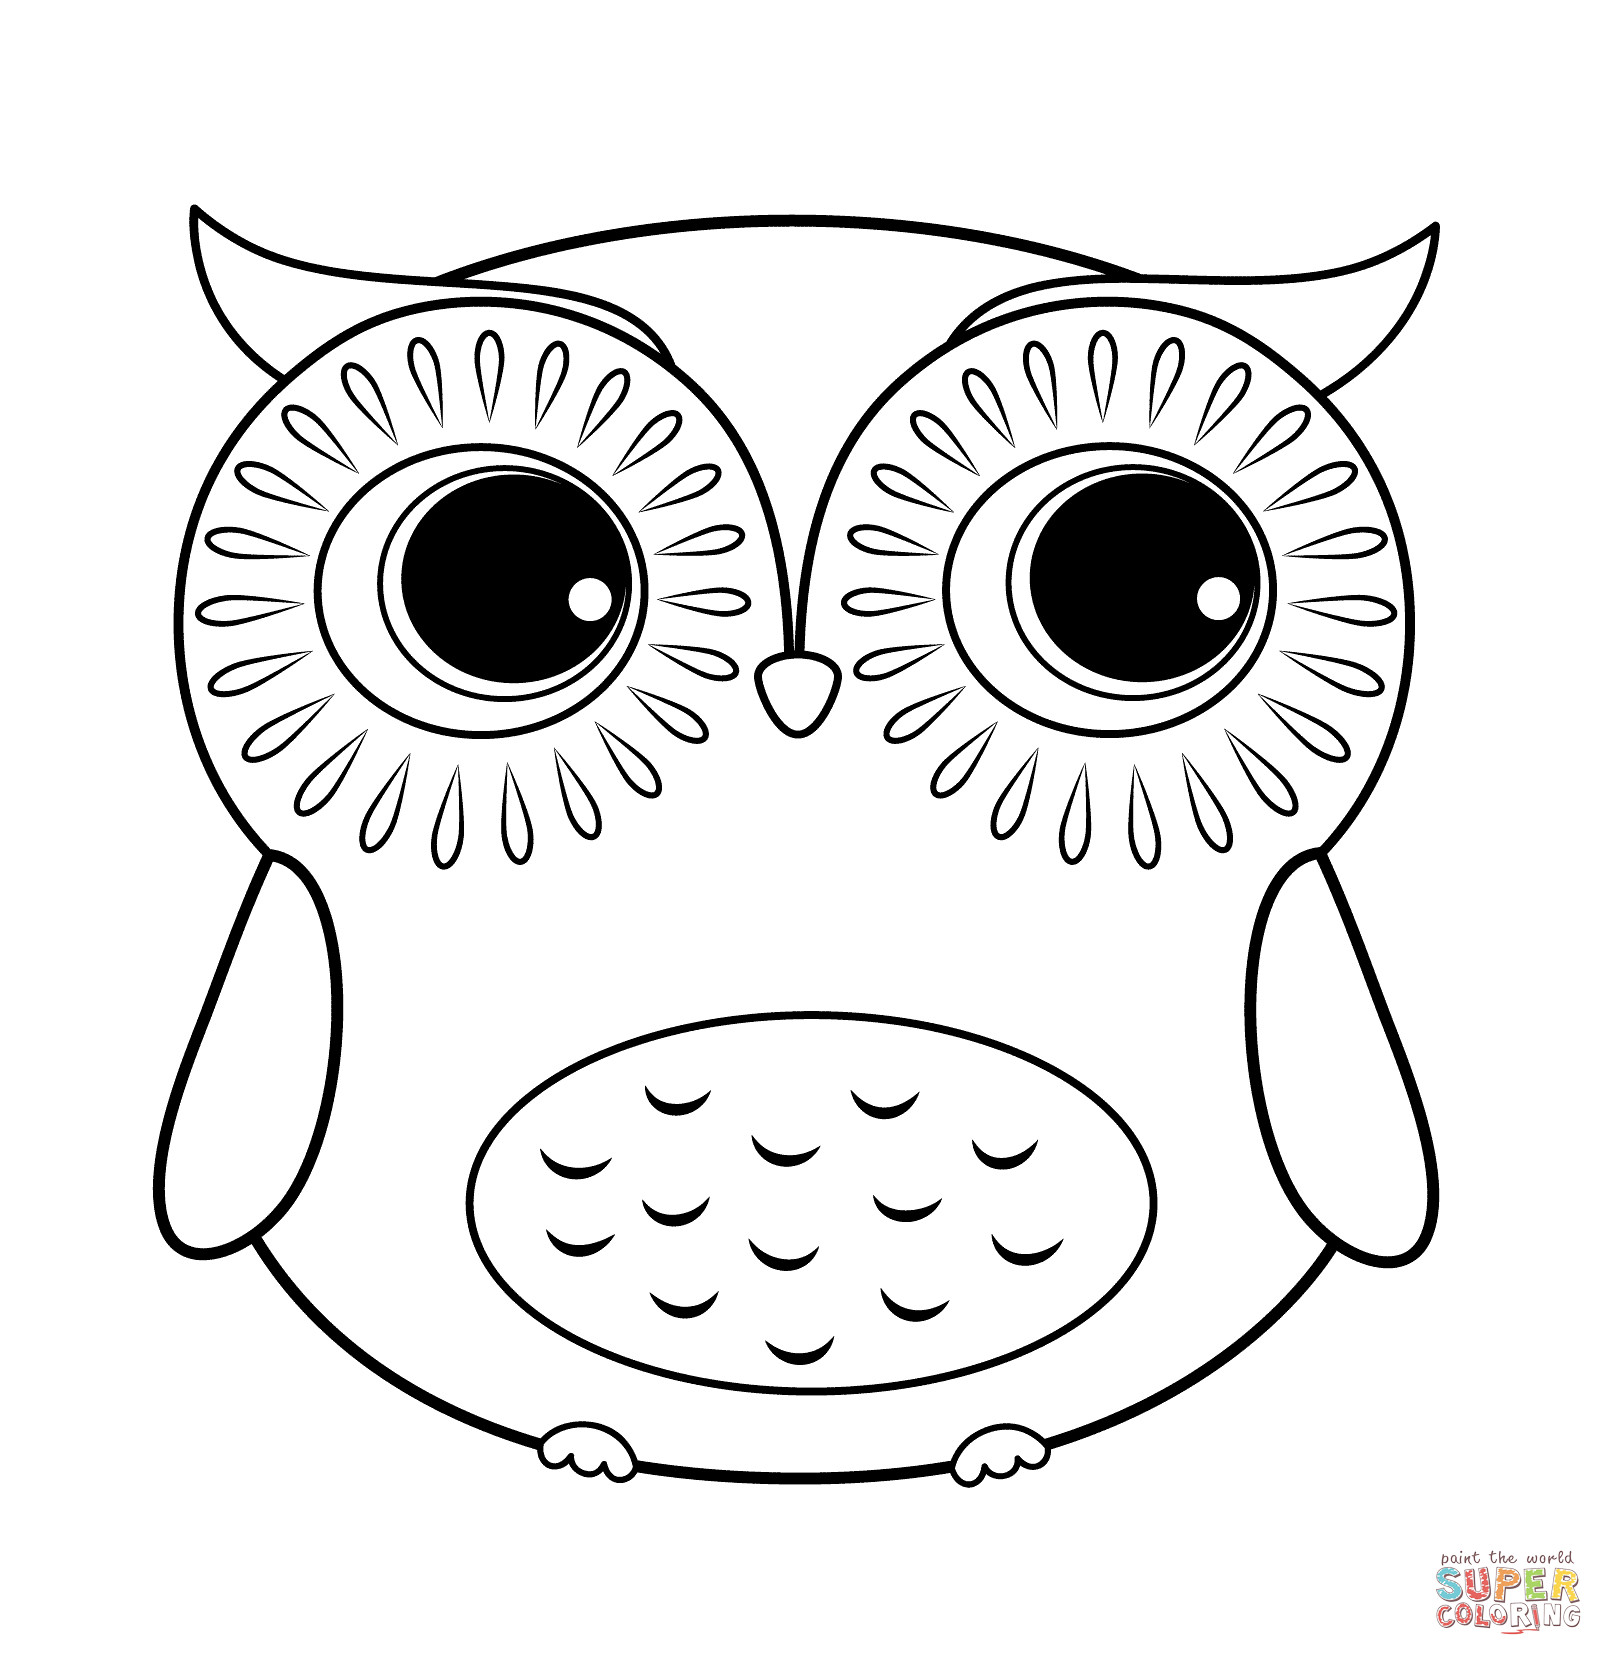 Free Printable Owl Coloring Pages
 Cartoon Owl coloring page